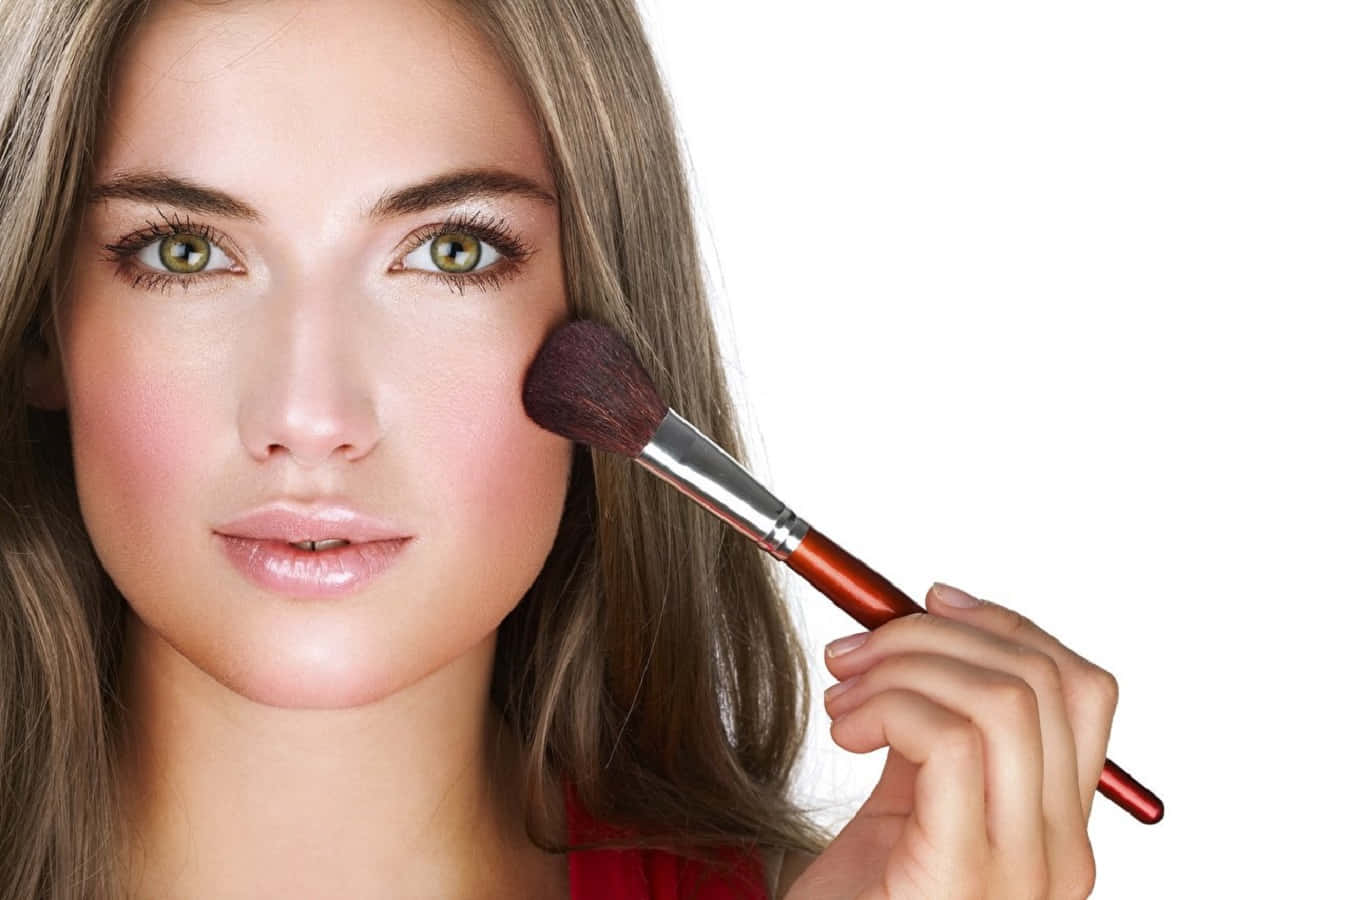 Flaunt Your Beauty With Professional Makeup